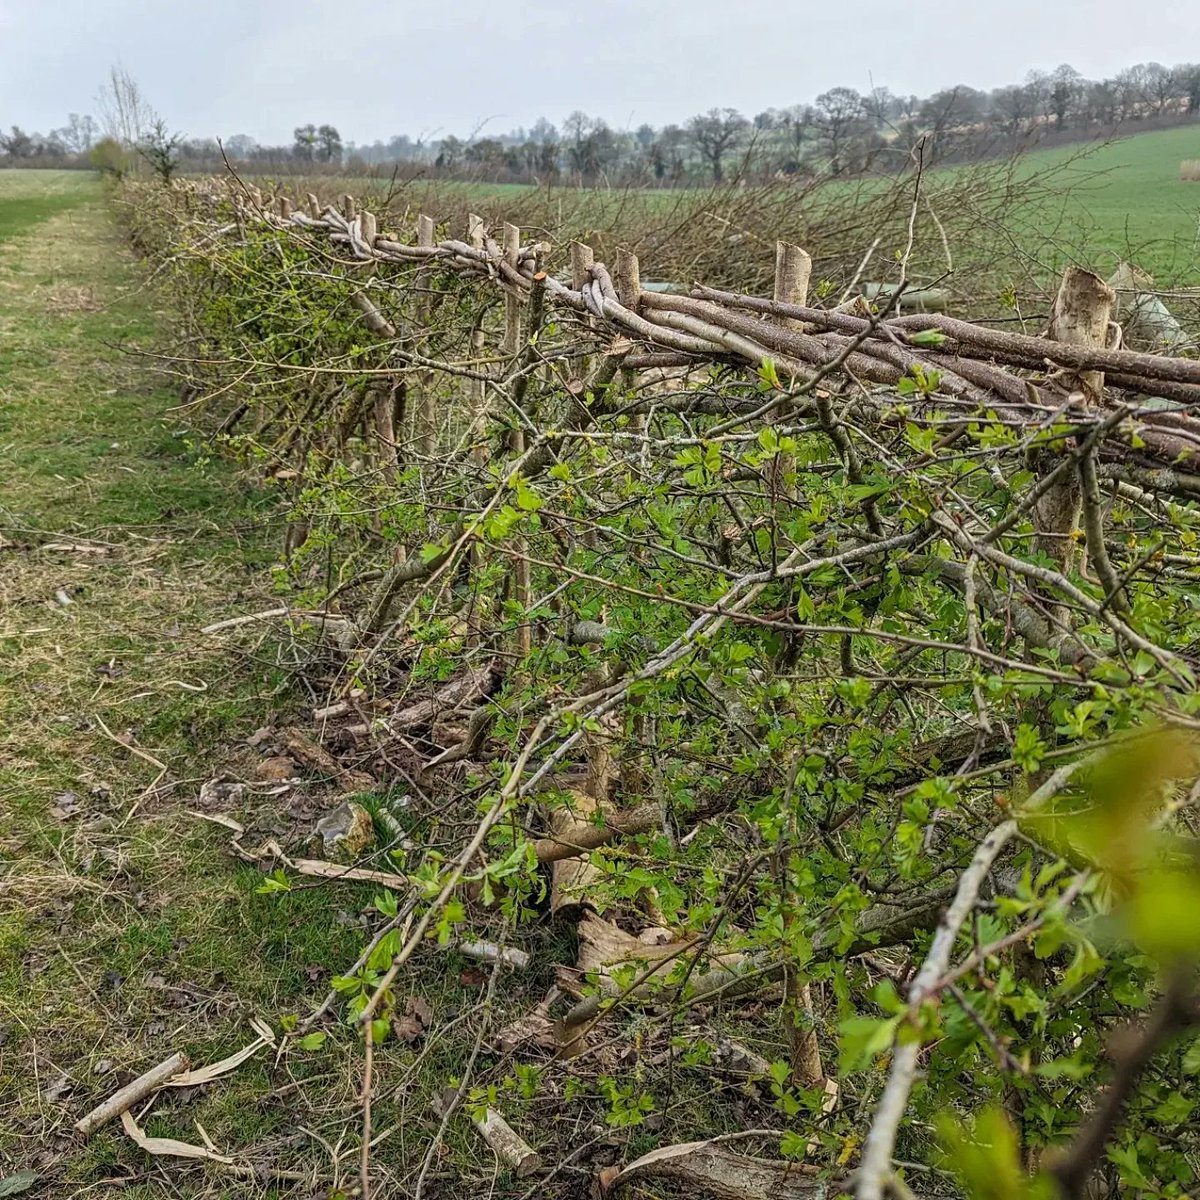 After laying miles of hedgerows in a previous career, I always stop&admire the time and effort put into this vital traditional skill. There are half a million miles of hedgerows and more than 30 different styles of hedgelaying across the UK. Hampshire #Hedgelaying #naturalcapital